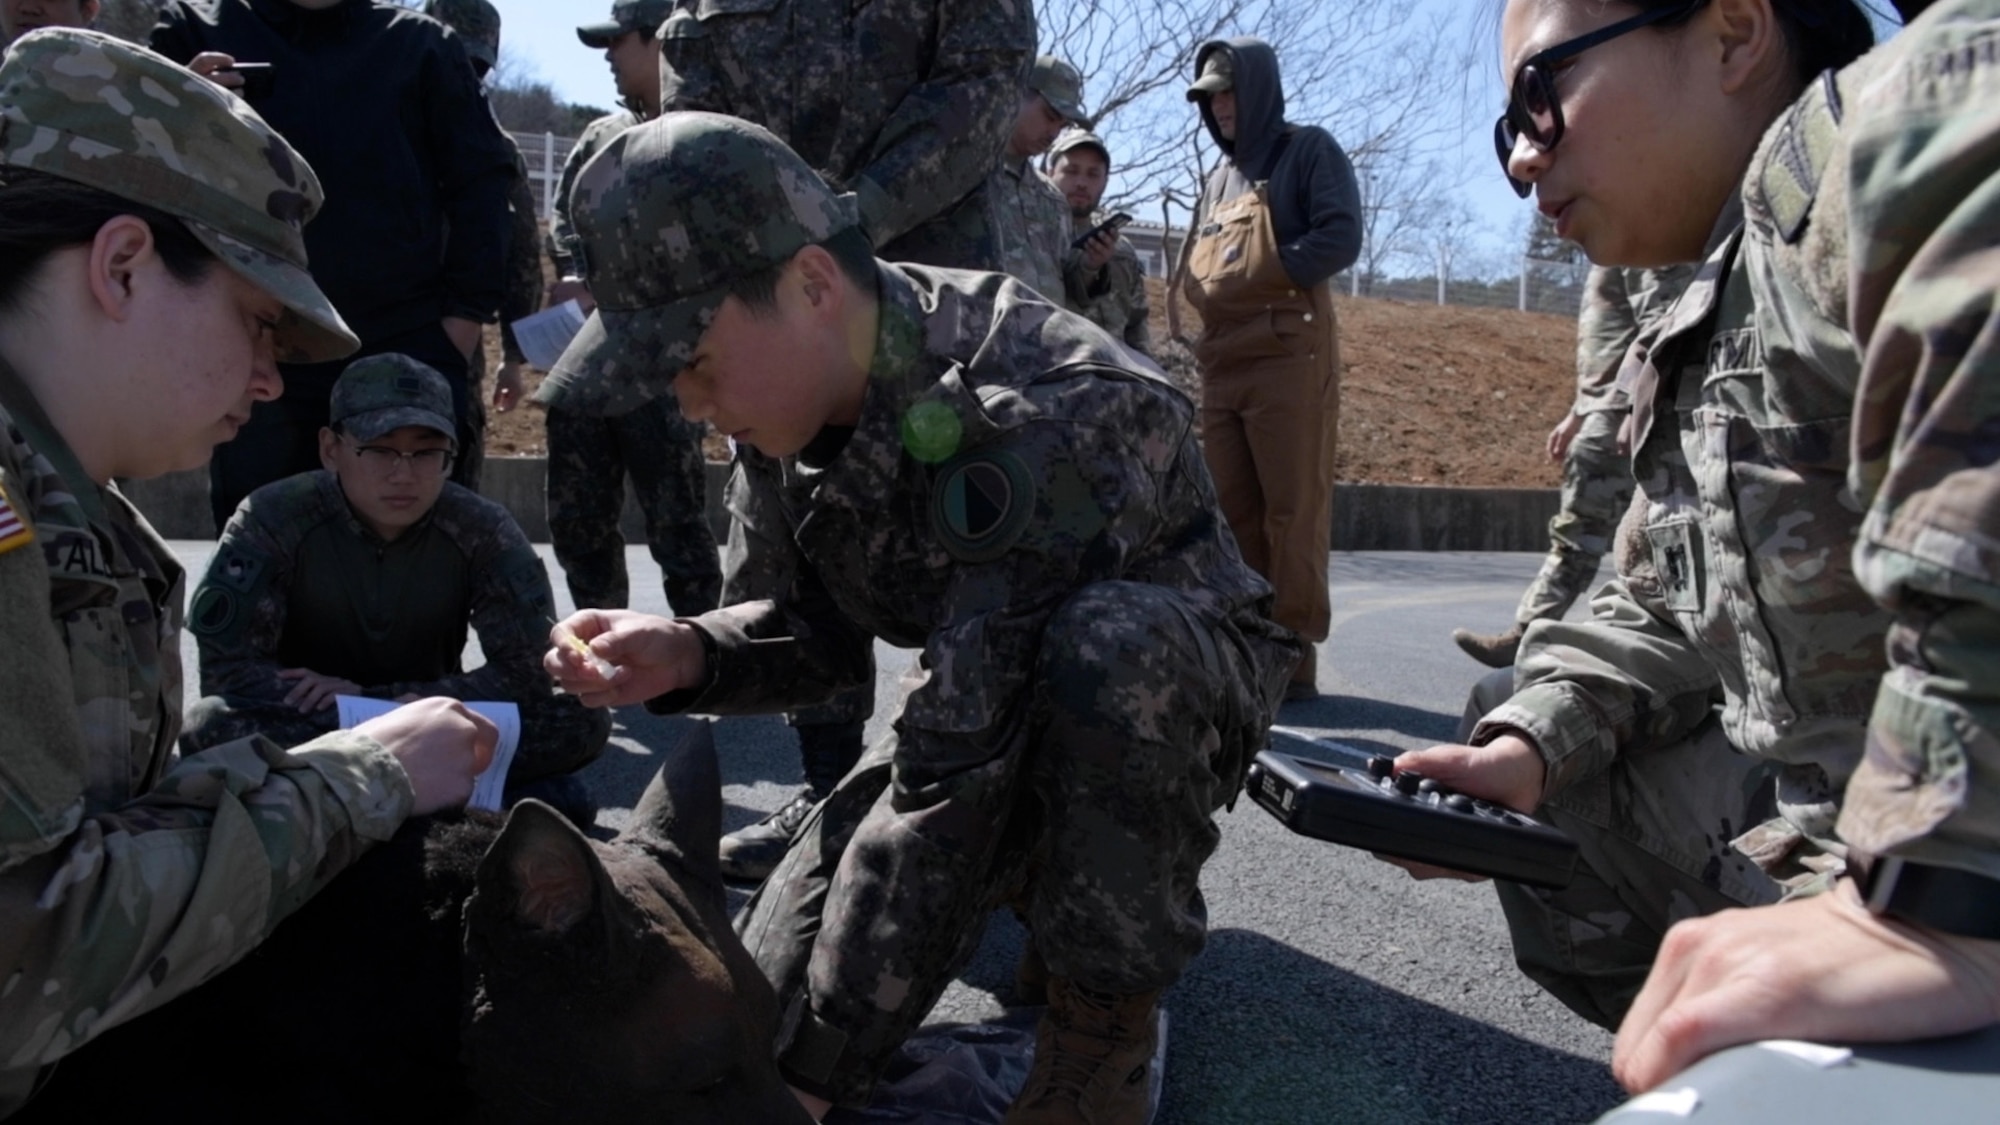 Republic of Korea Army soldiers train on TCCC alongside U.S. Army soldiers from the 106th Medical Detachment, Veterinary Service Support unit at Nonsan, ROK, Mar. 14, 2023. Throughout a training event called Operation Dragon Alliance, they engaged in hands-on military working dog TCCC training with the help of a "diesel dog" - a full-body simulator for MWD handlers and veterinarians. (U.S. Air Force photo by Tech. Sgt. Timothy Dischinat)